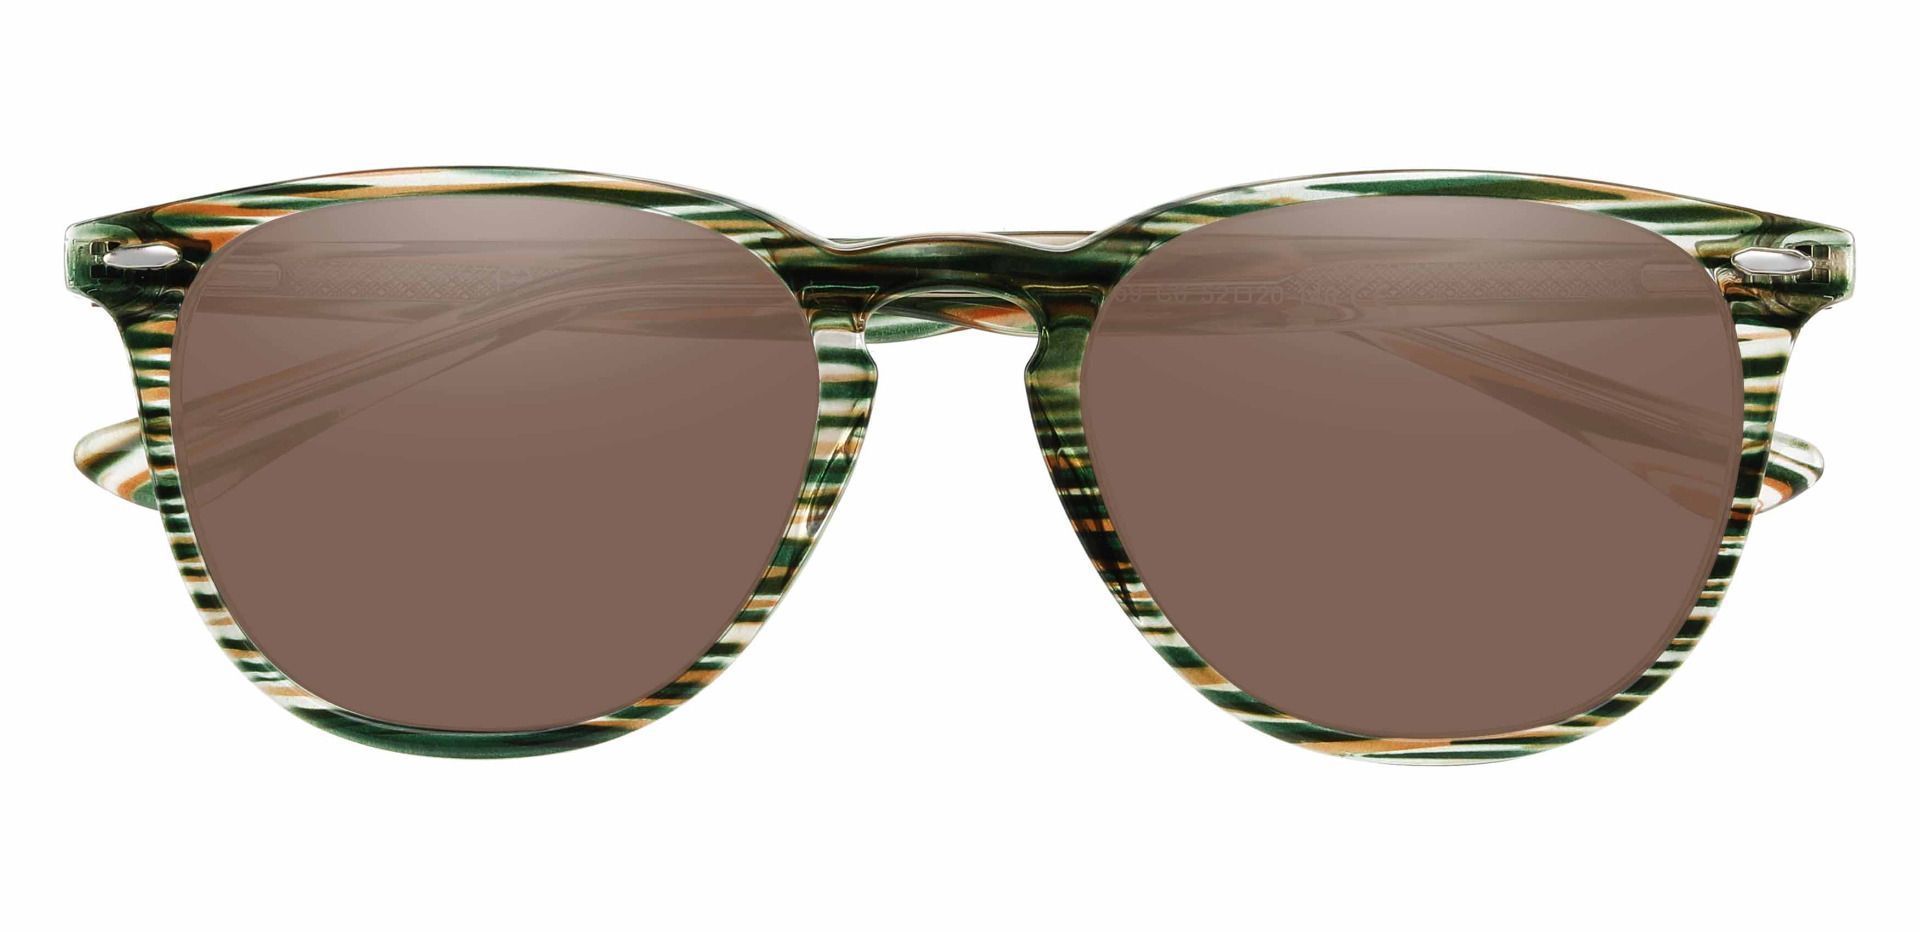 Sycamore Oval Prescription Sunglasses - Green Frame With Brown Lenses